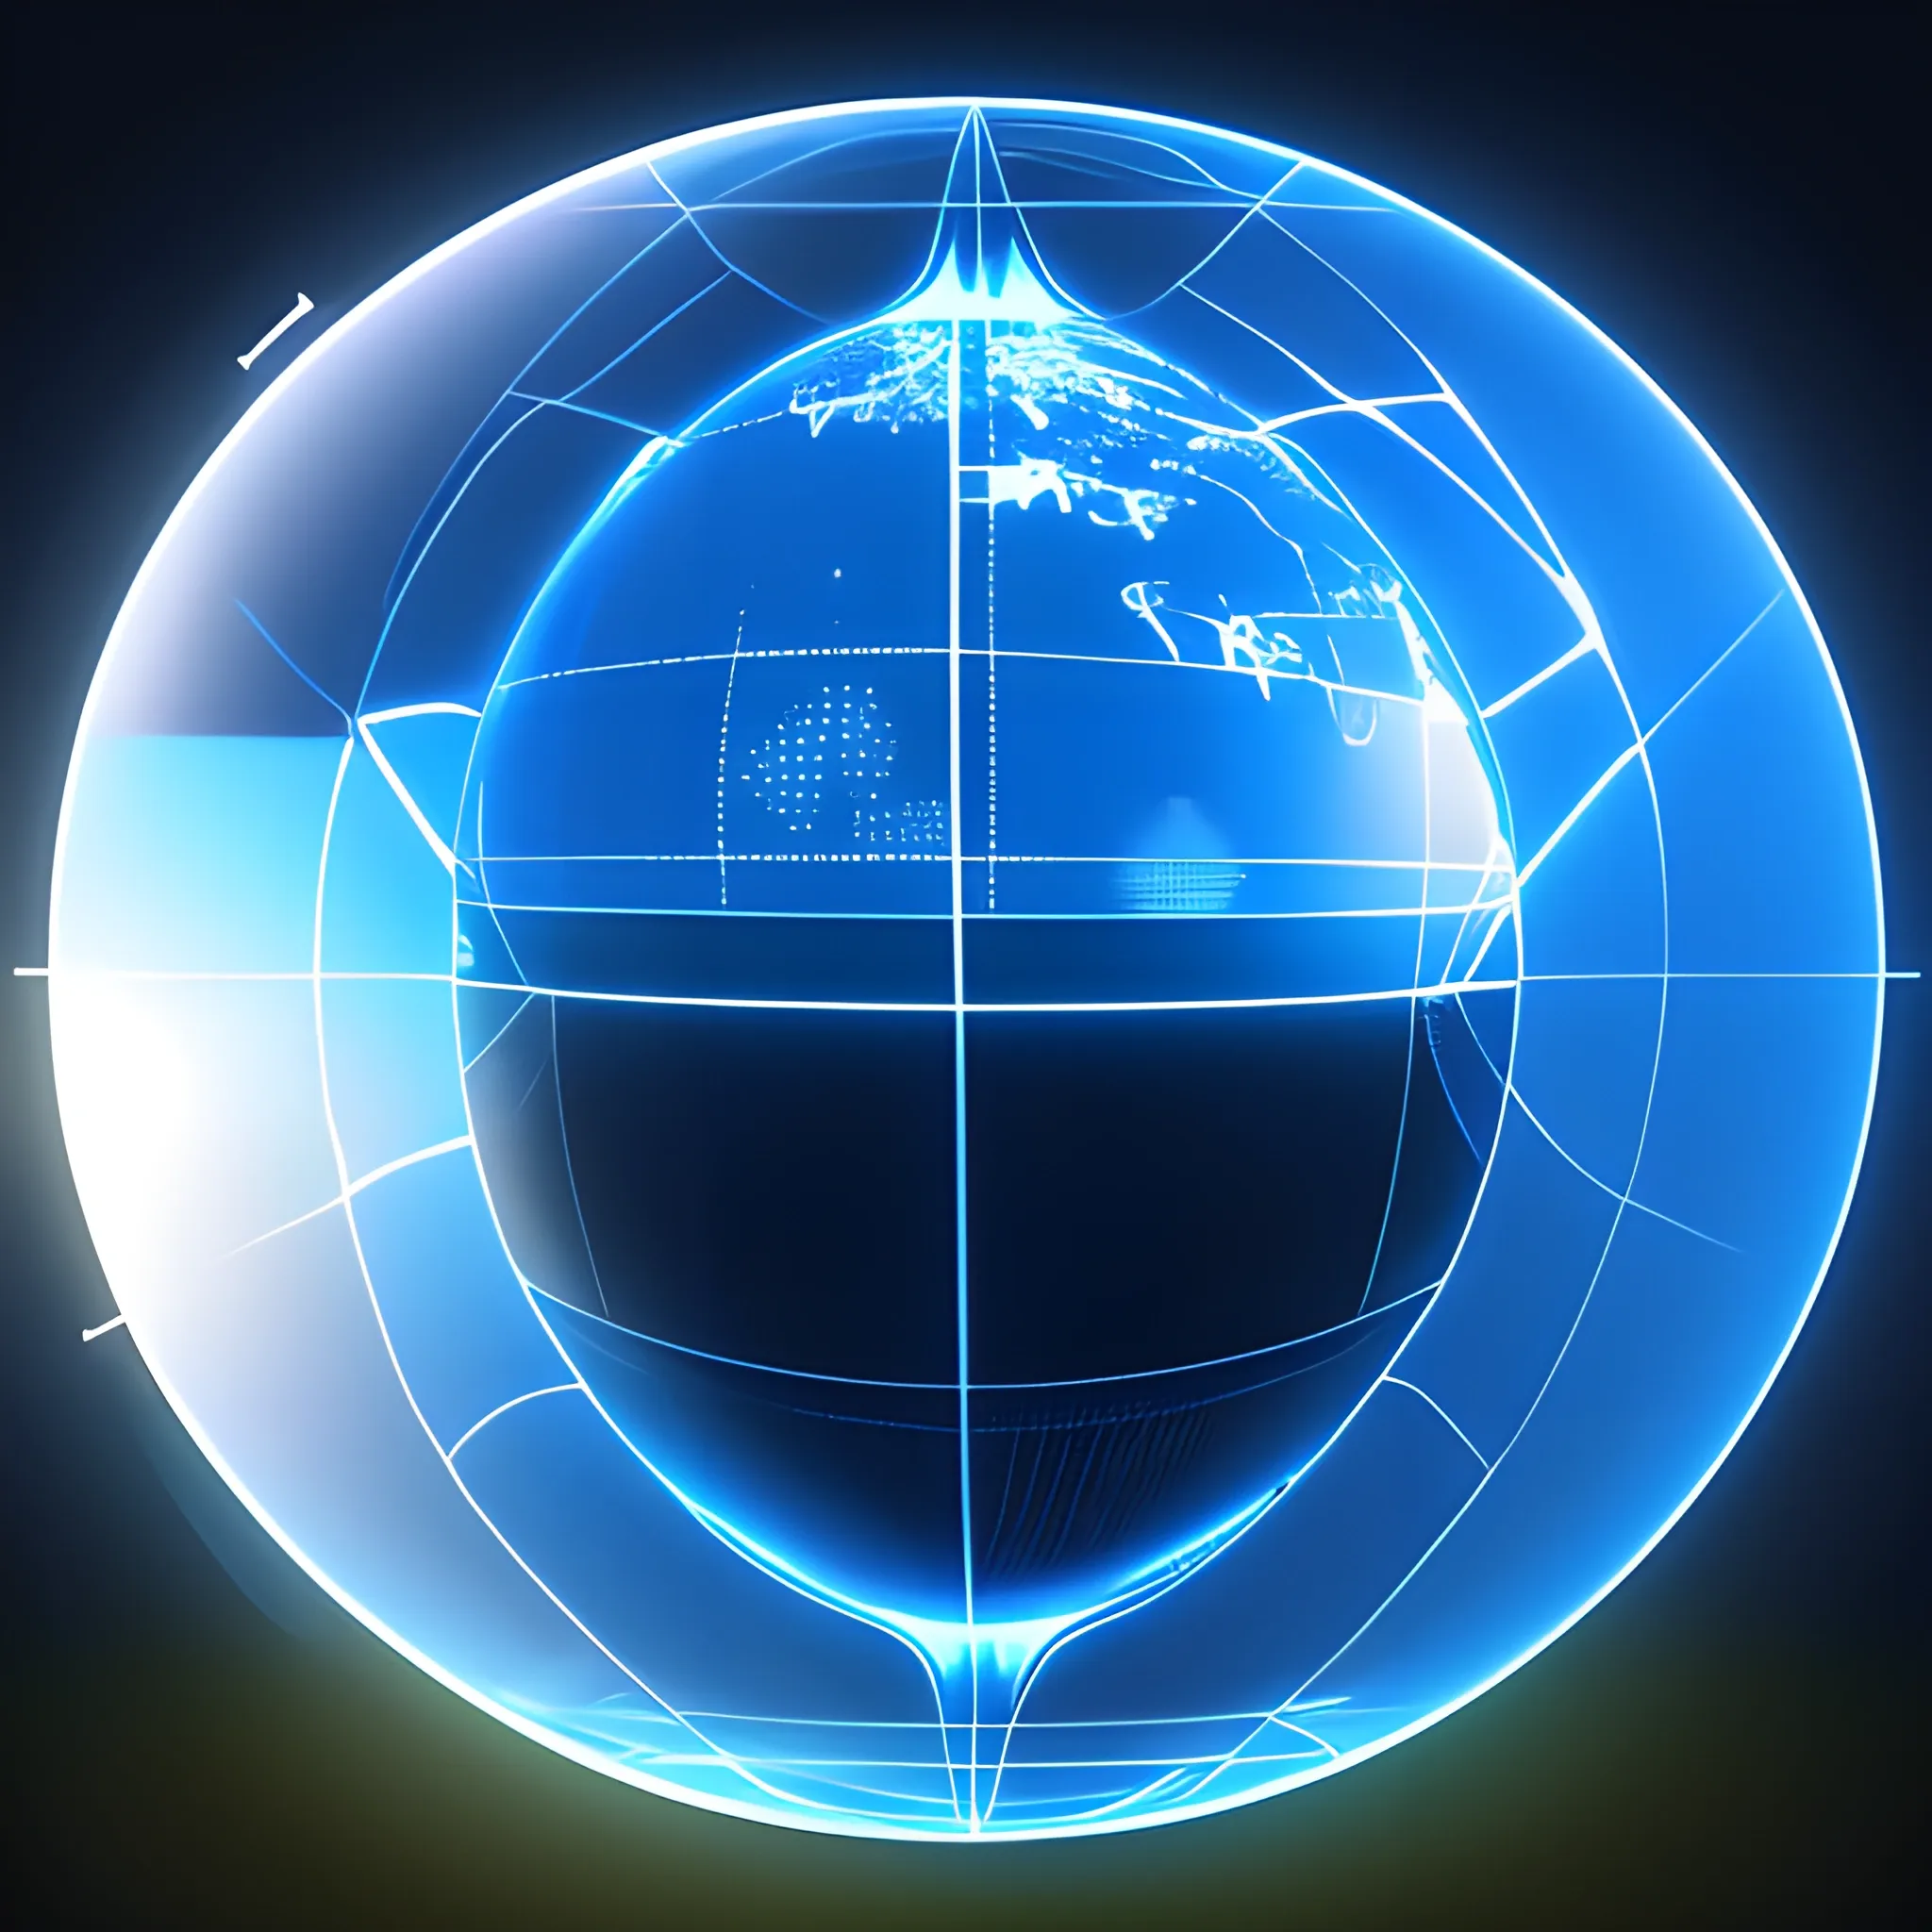 environment projected on a sphere, in a server environment, with blue monitor lighting